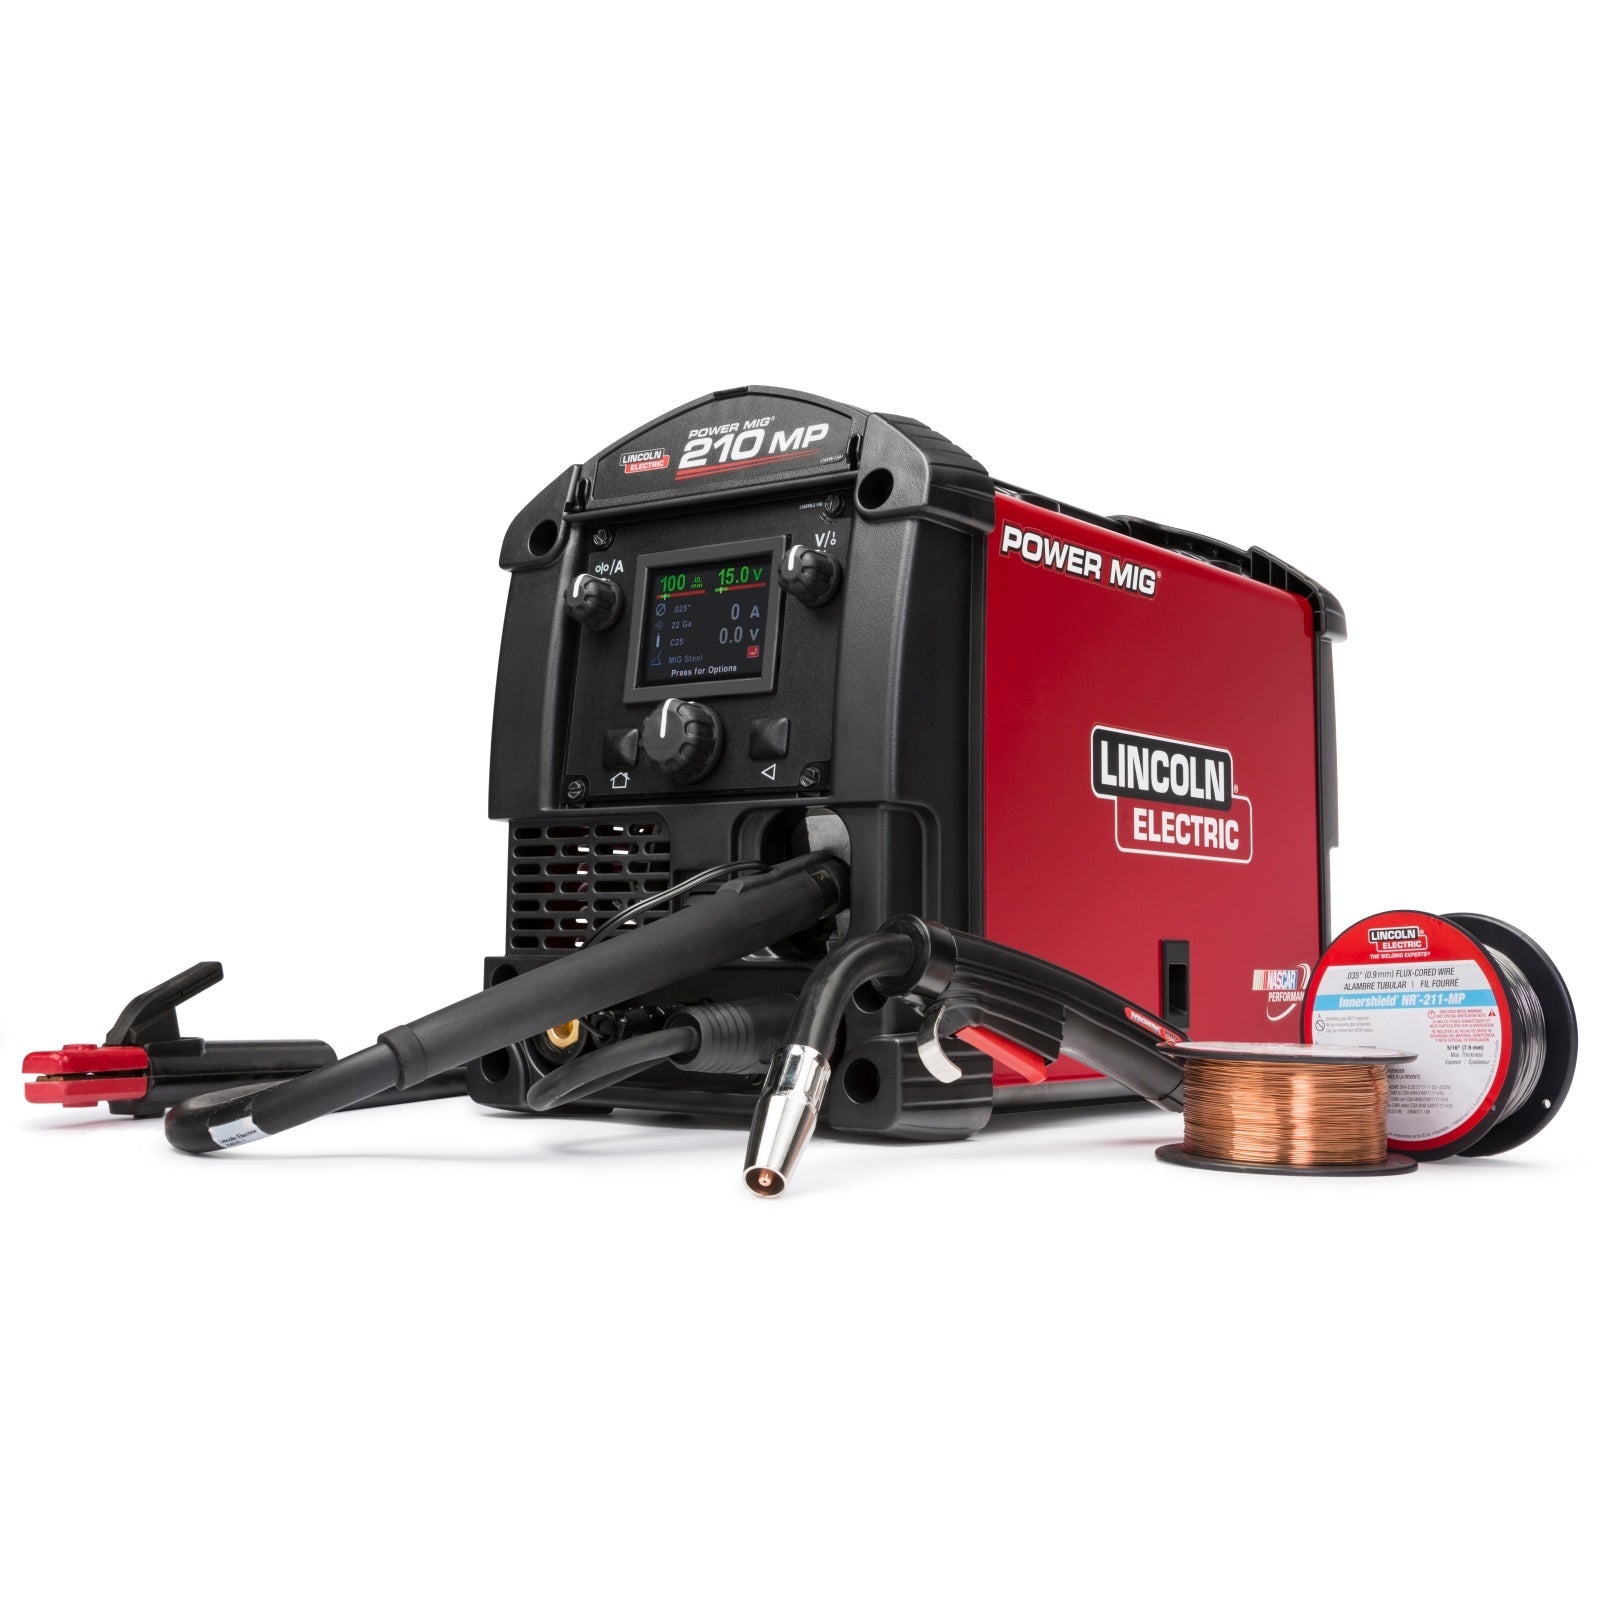 Lincoln Power MIG 210 MP Multi Process Welder and Deluxe Cart (K3963-1, K520)